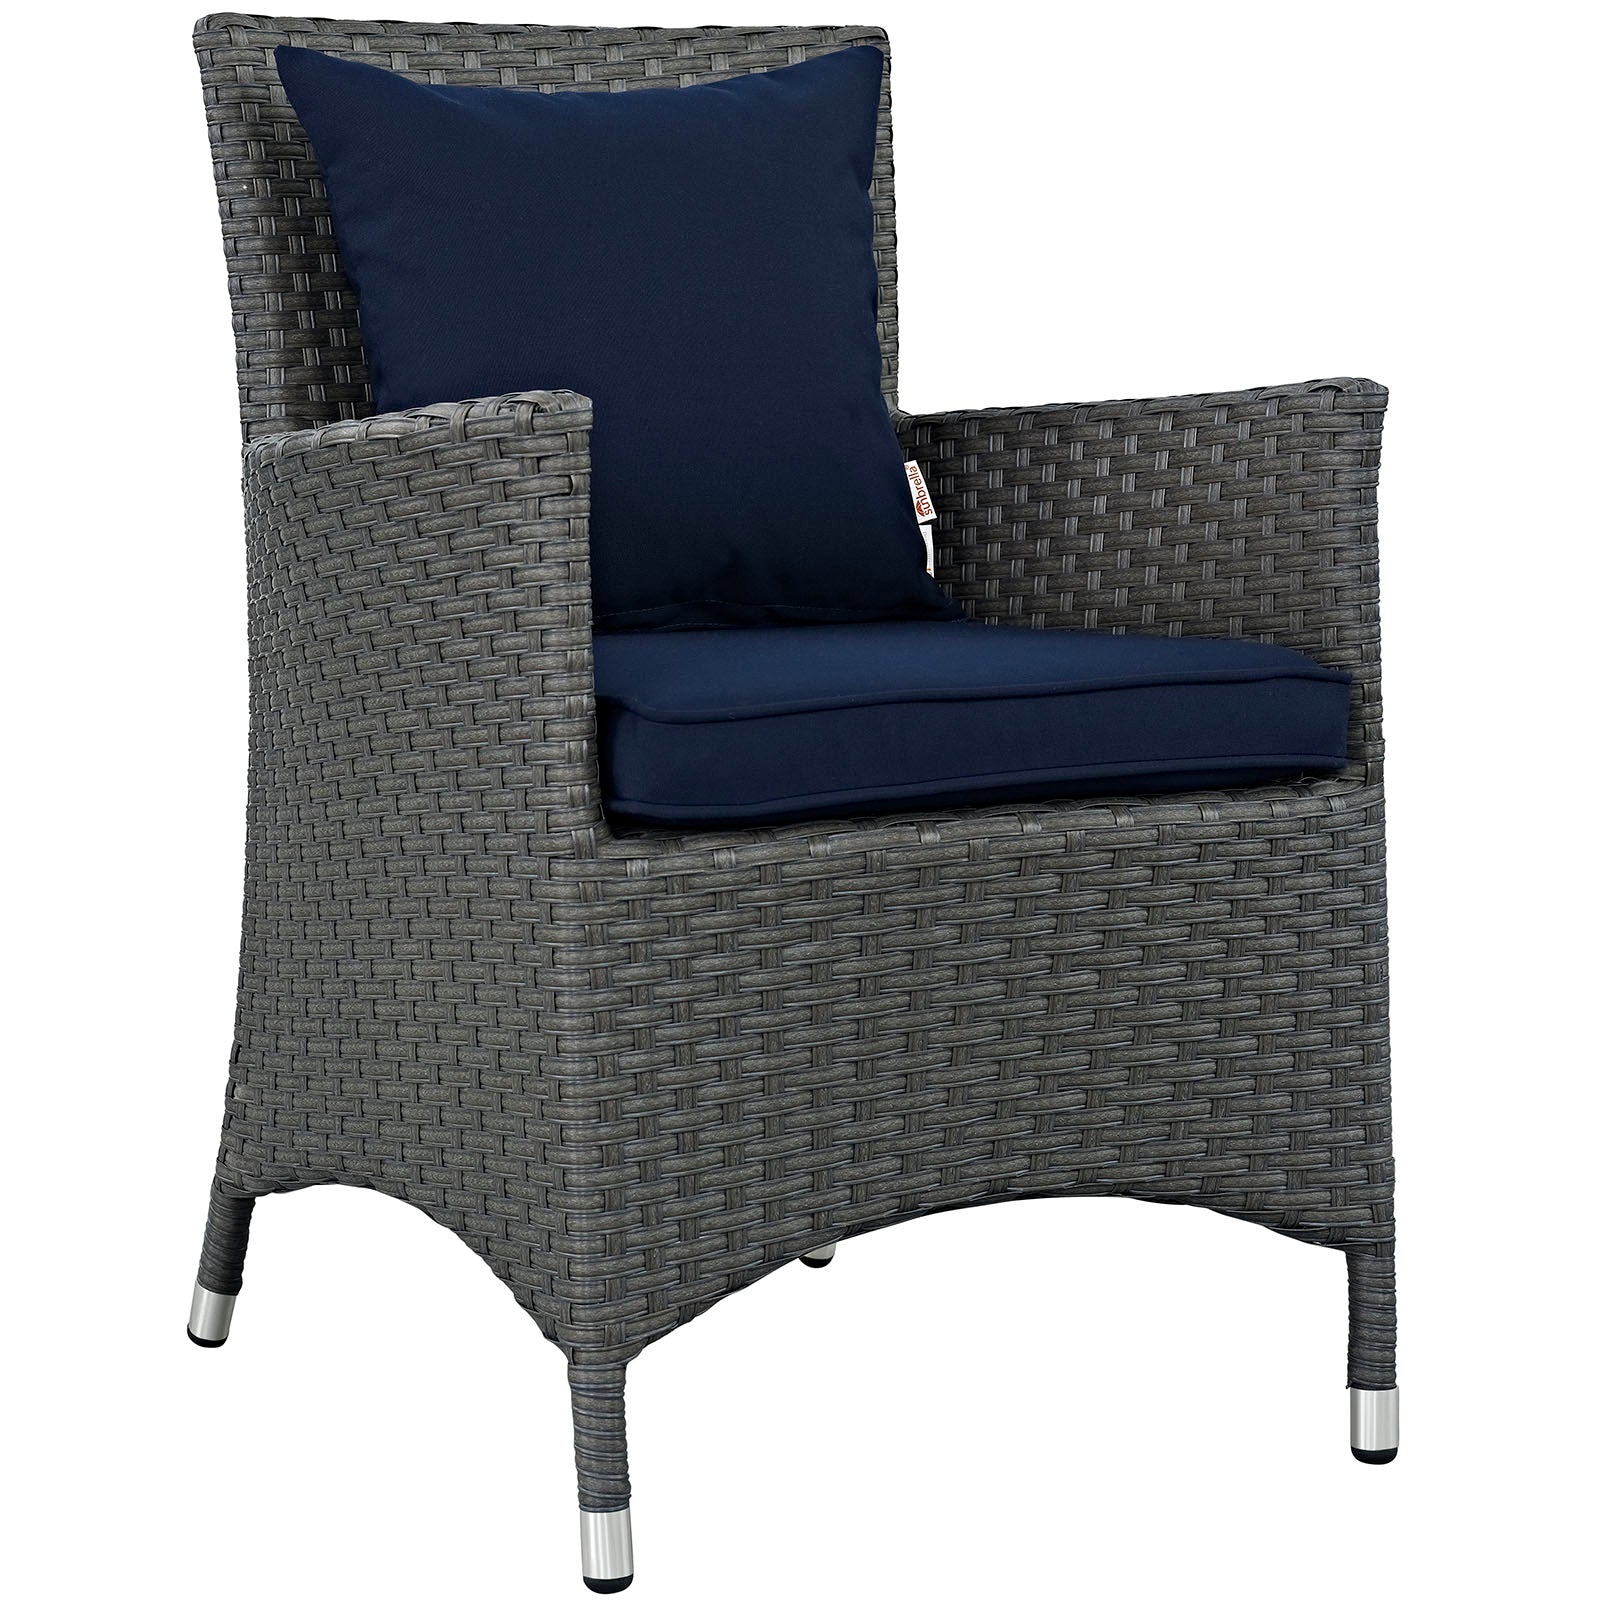 Modway Outdoor Dining Chairs - Sojourn Outdoor Patio Dining Chairs Canvas Navy (Set of 2)